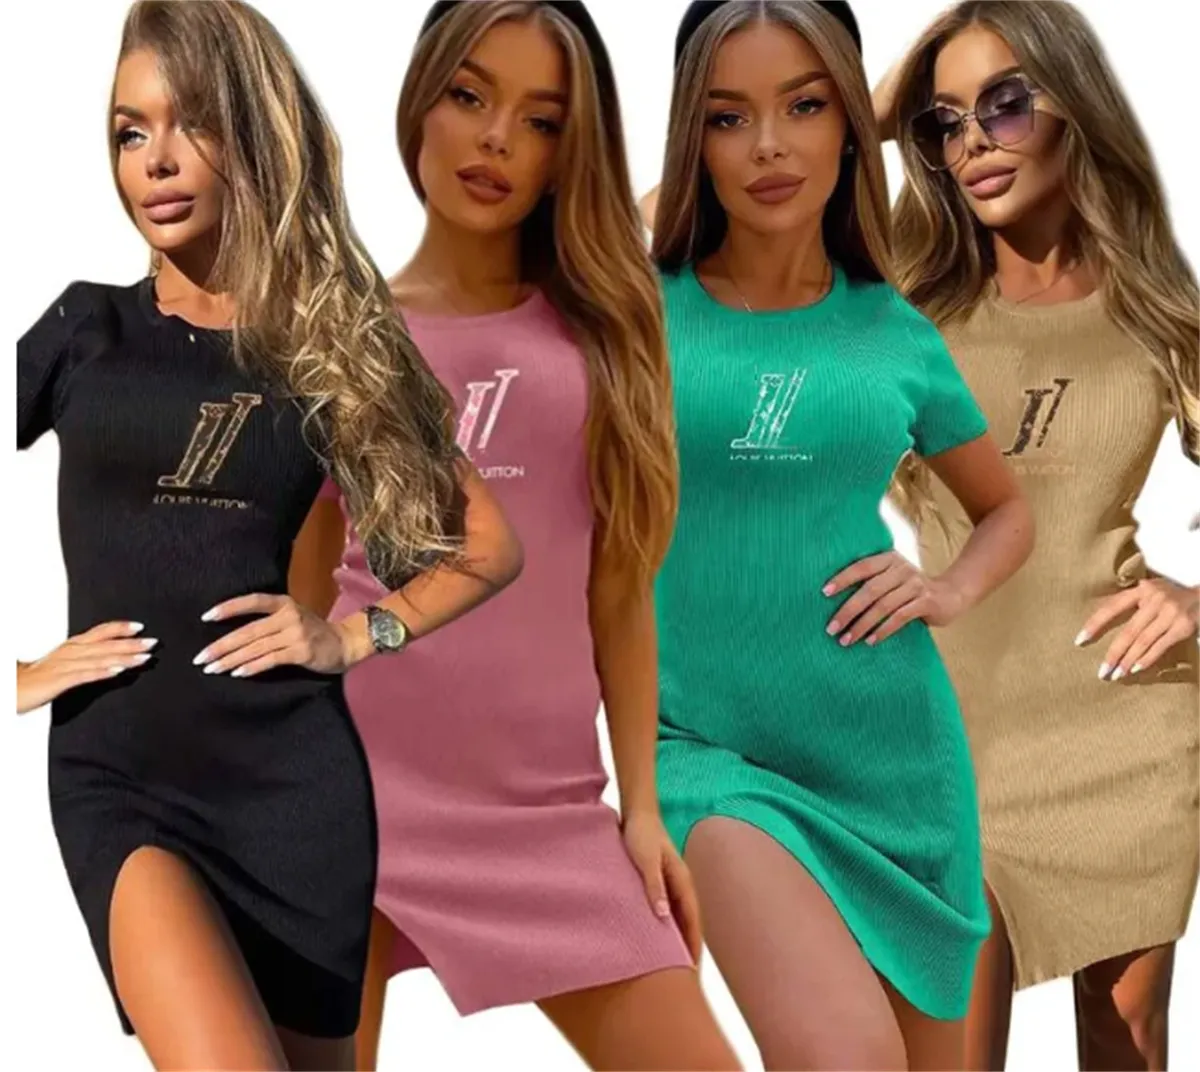 Womens Knit long dress Sexy metal lettle t shirt womens summer dresses casual lady slim sleeveless top sexy cotton clothing Knitting Dress Femme Skirts Blouse Femme